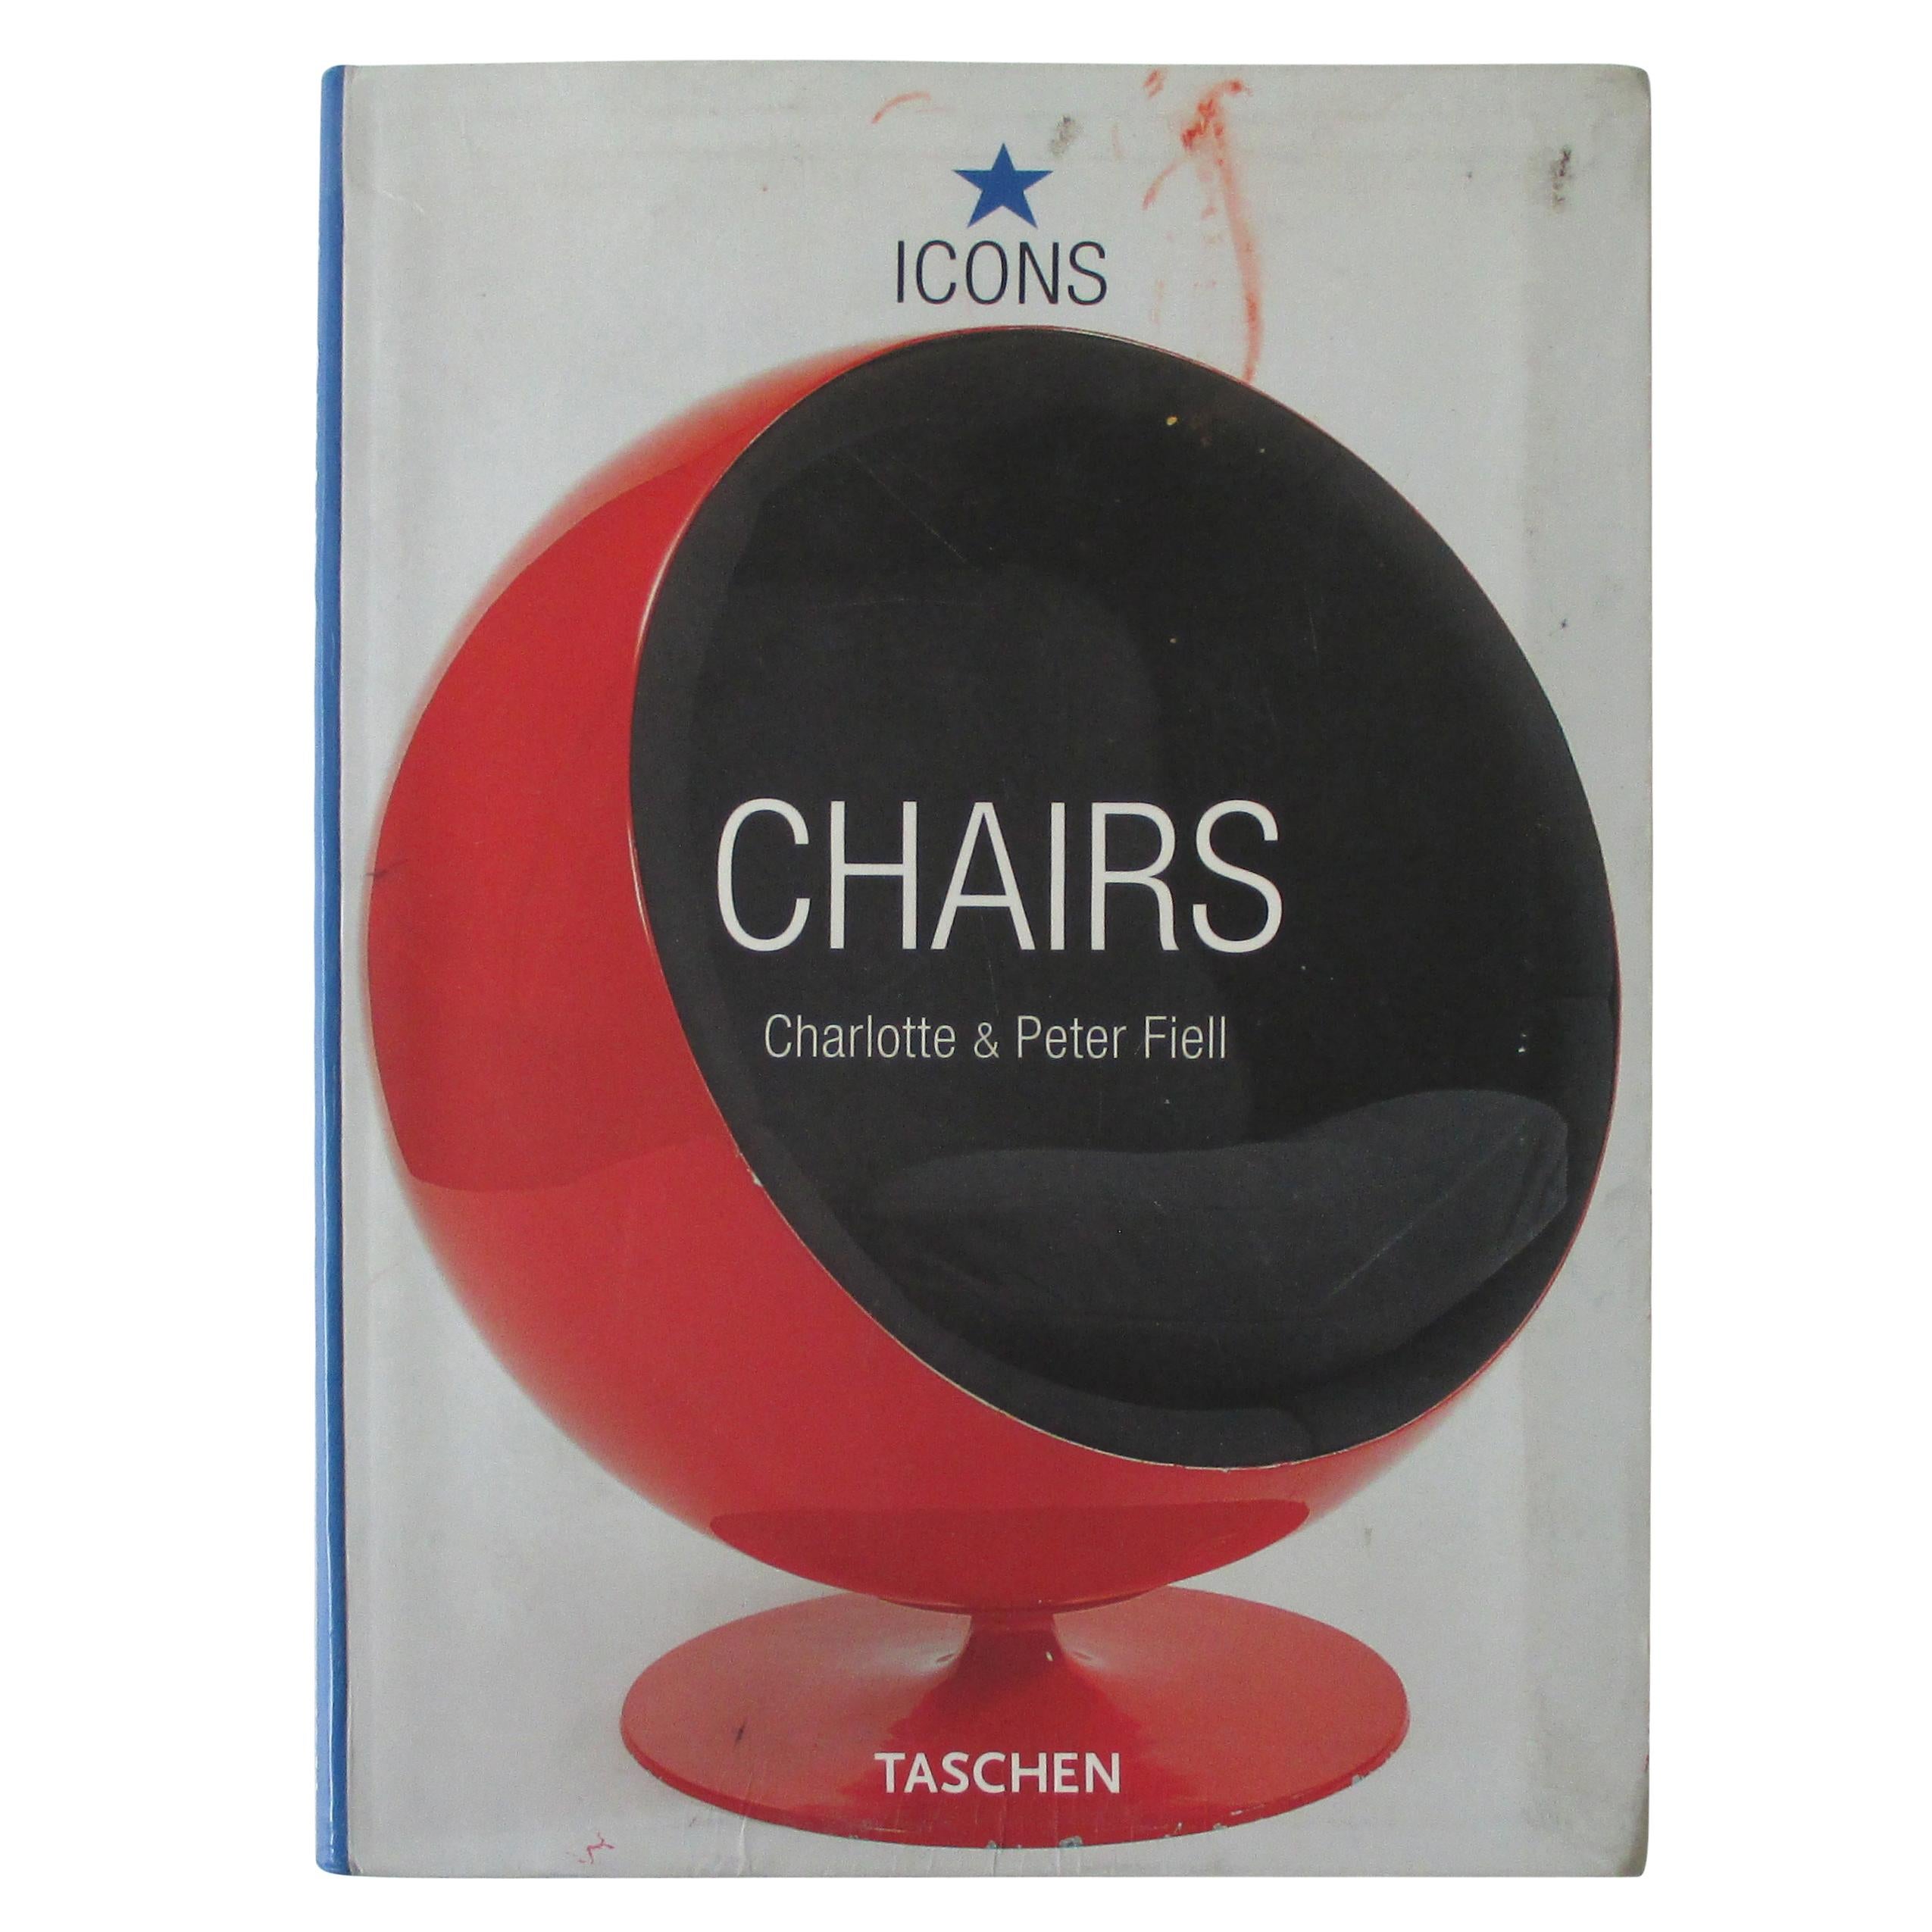 "Chairs" Icons Series by Taschen Book